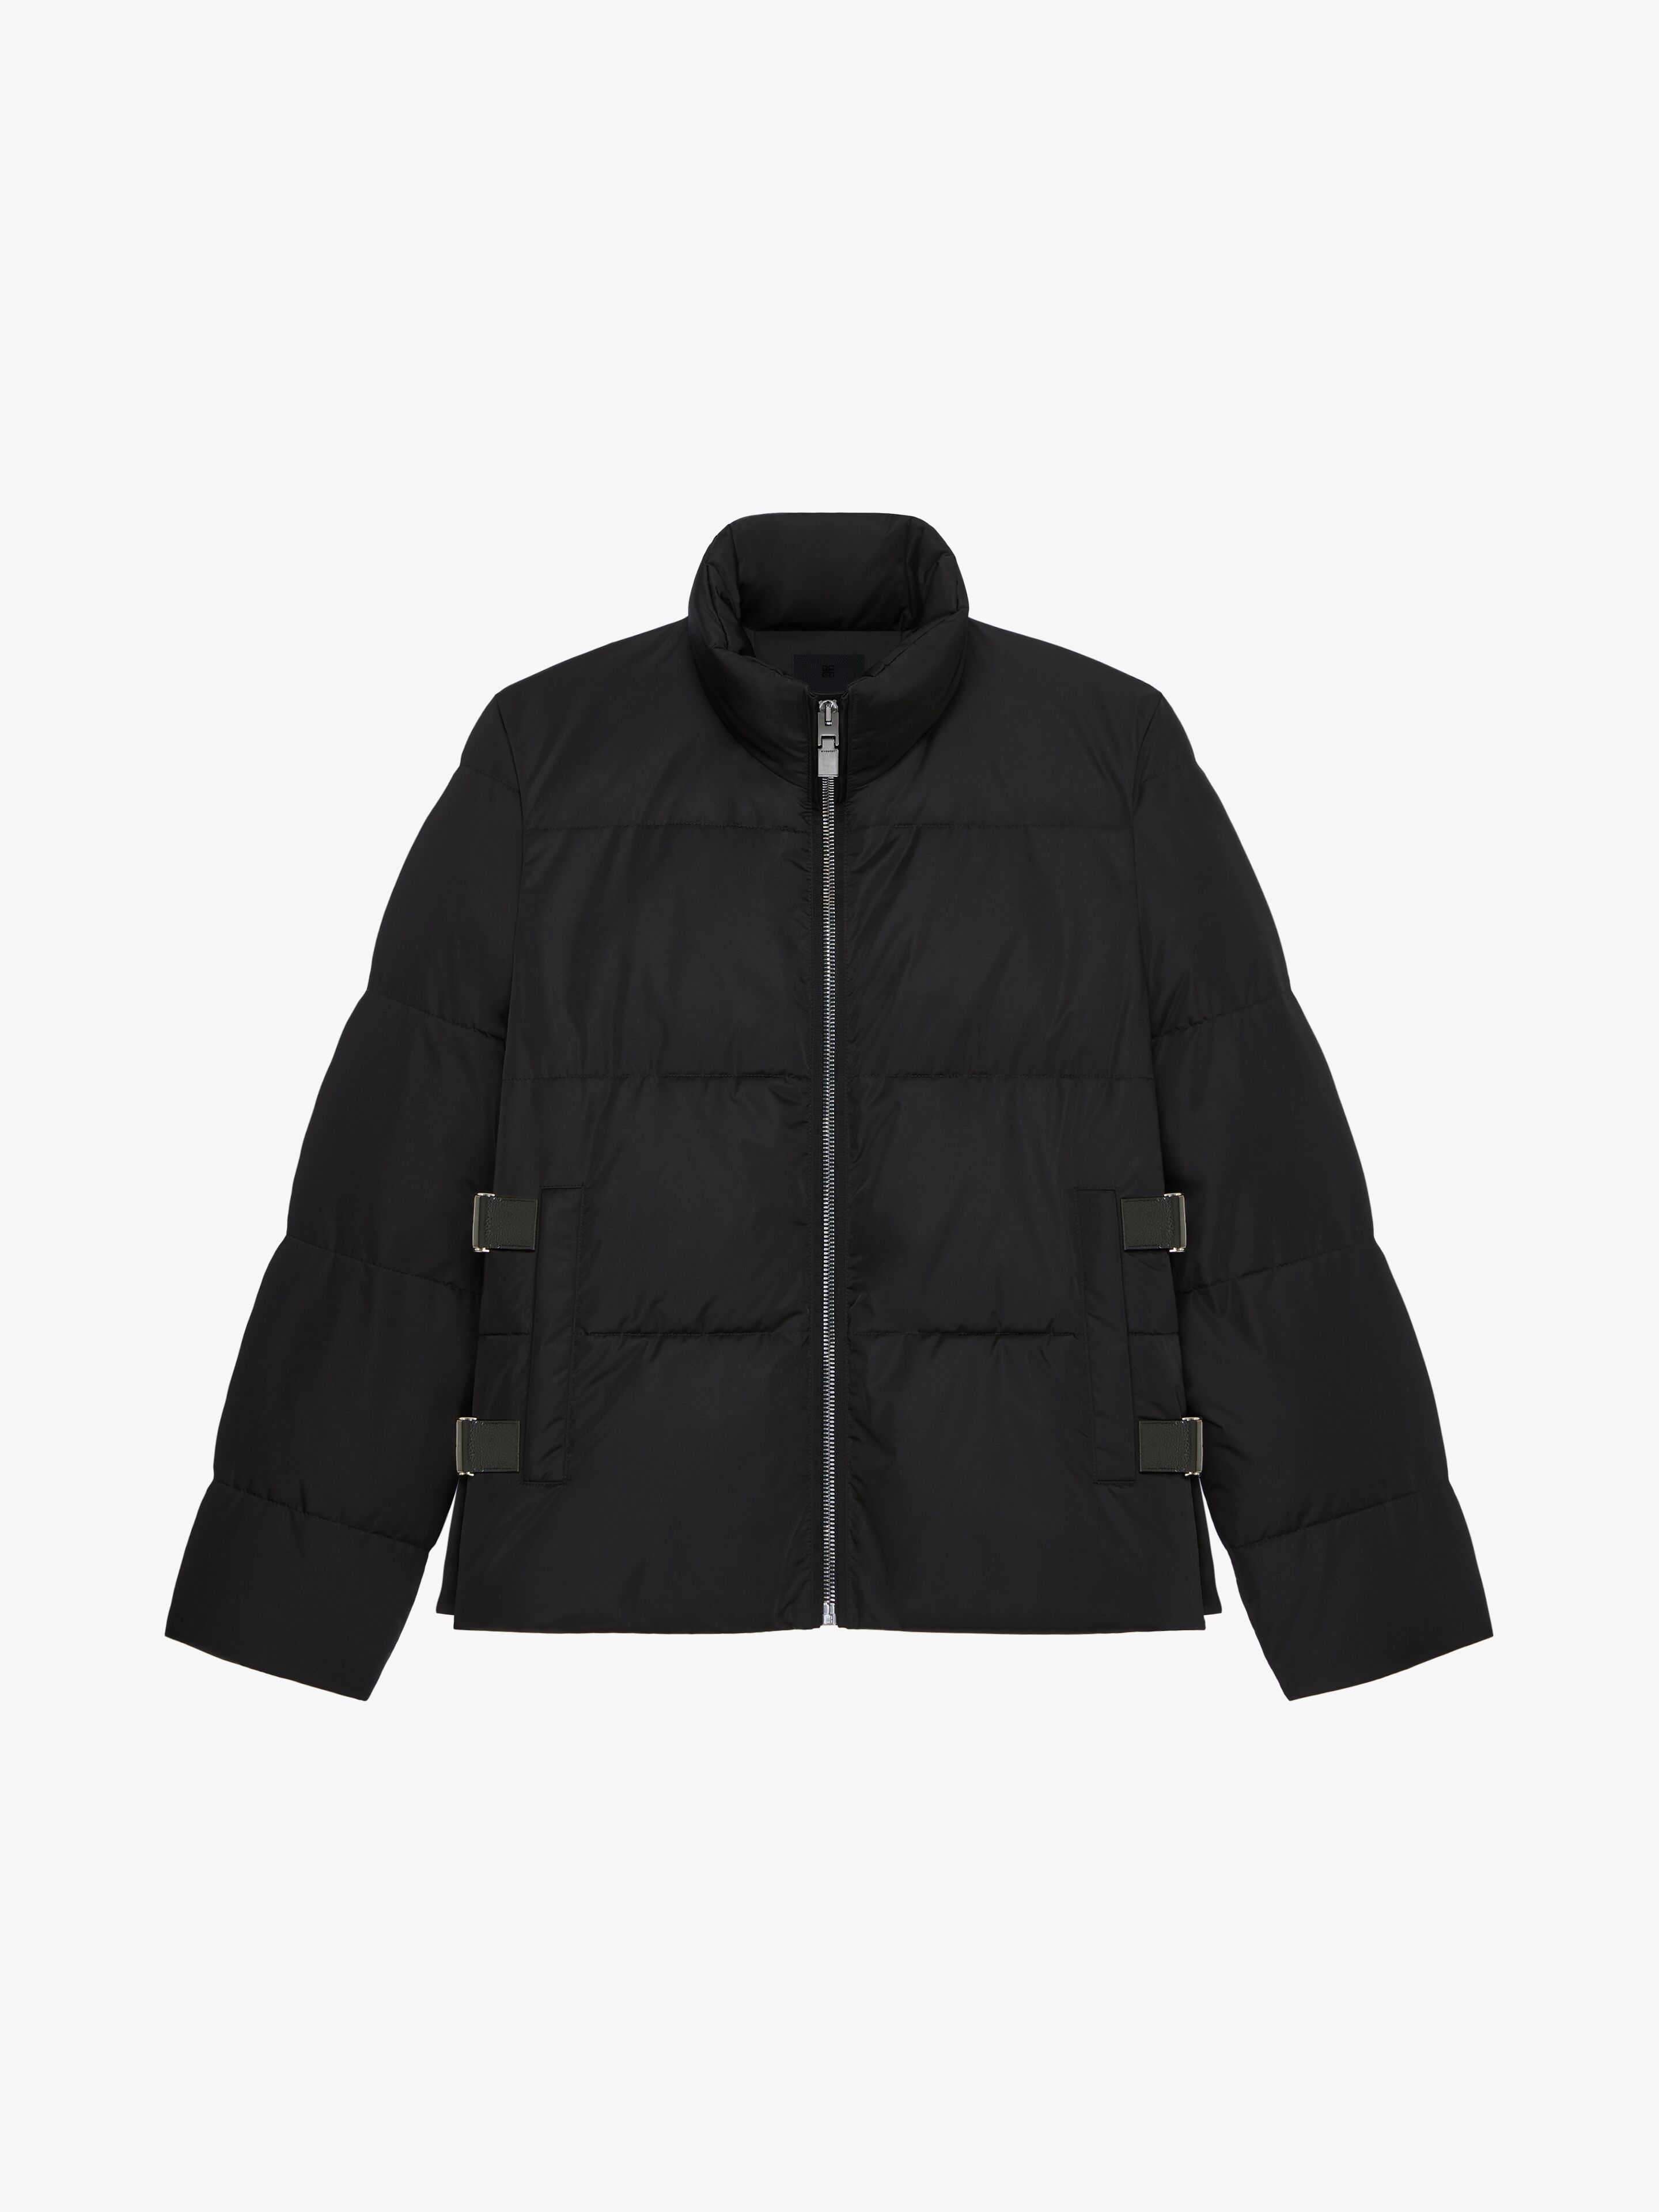 Luxury Outerwear & Blousons Collection for Men | Givenchy